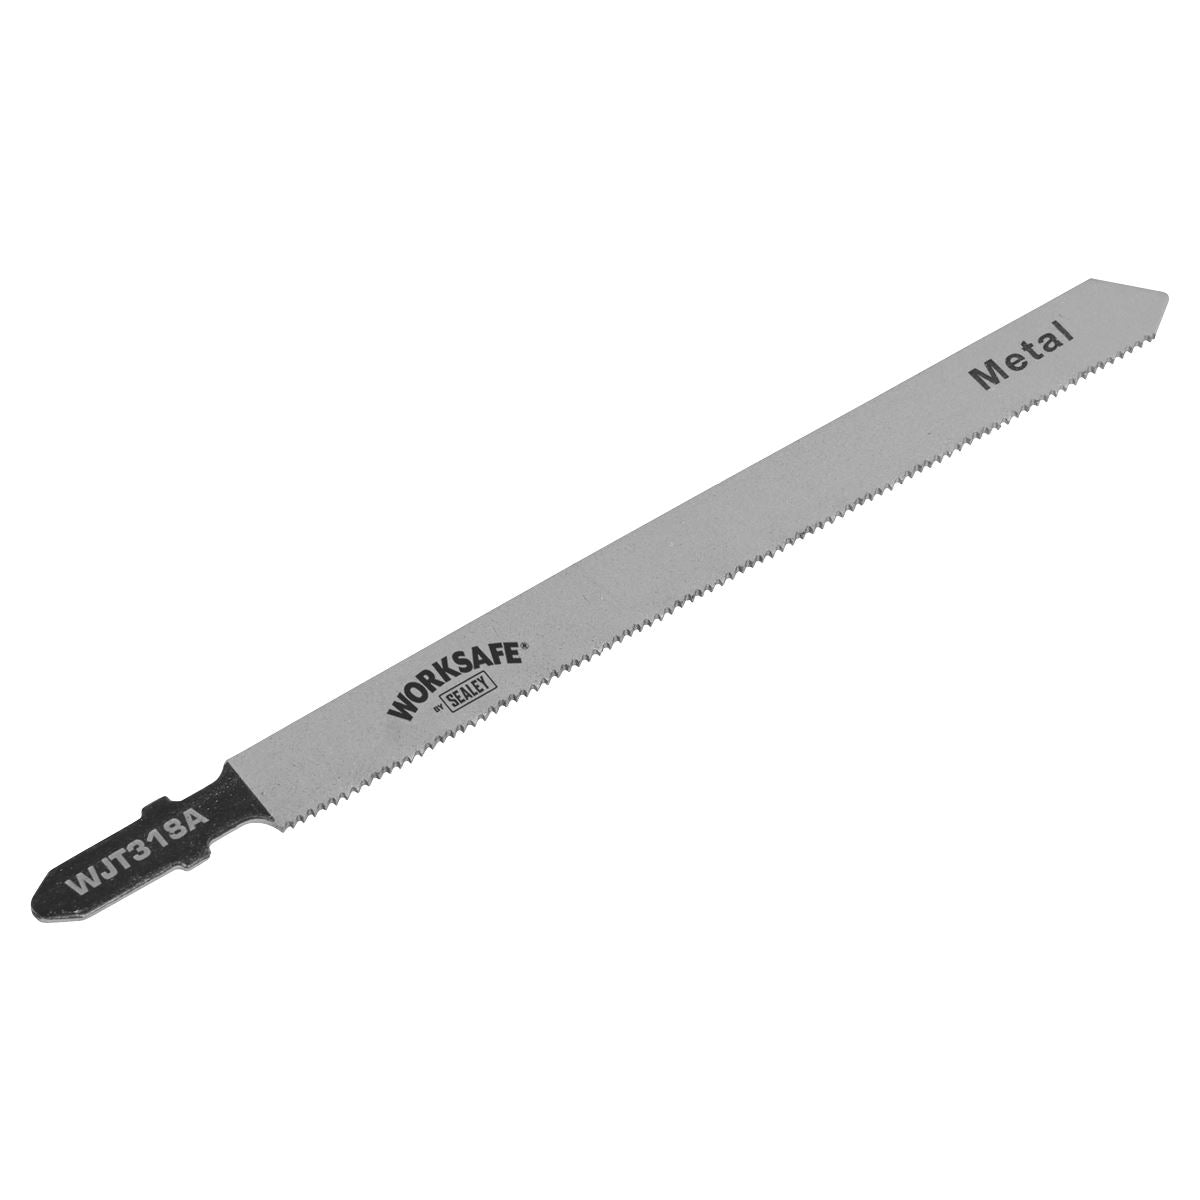 Sealey Jigsaw Blade Metal 105mm 21tpi - Pack of 5